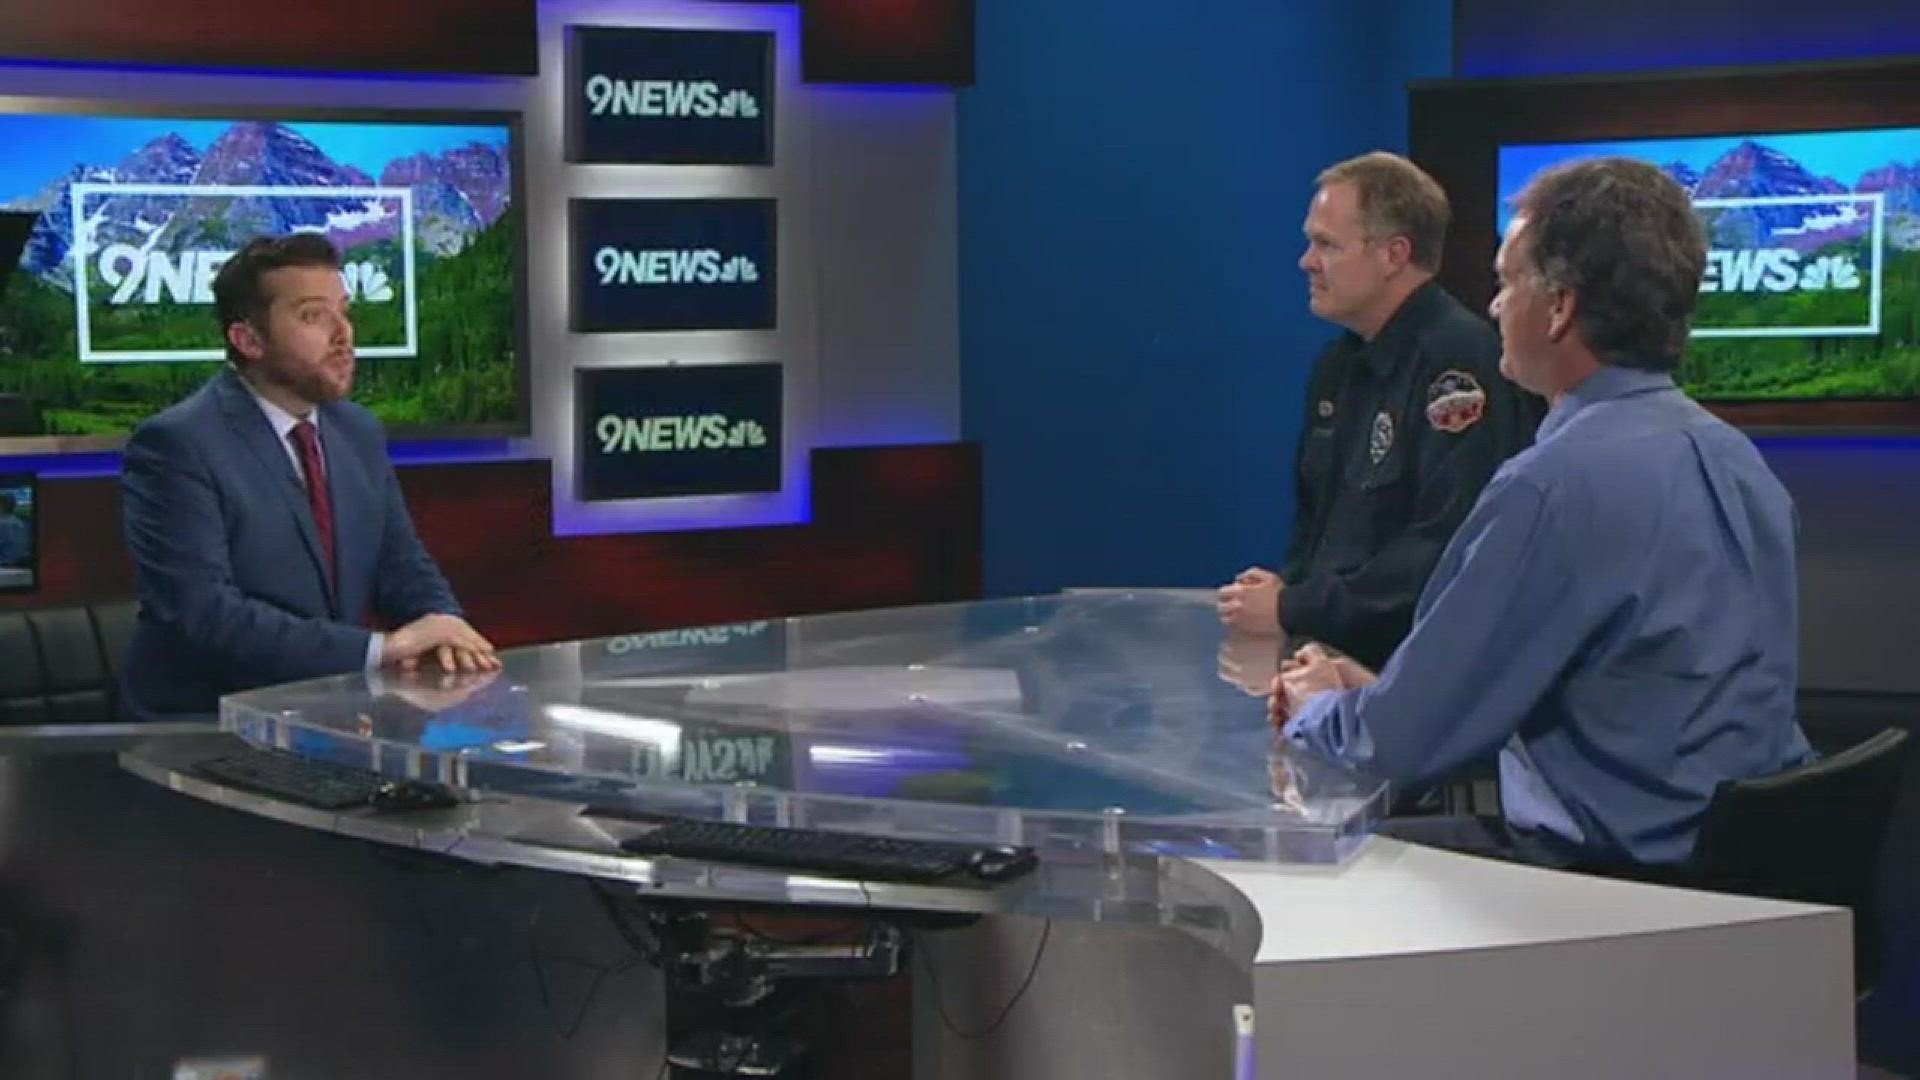 Jim Webster from Wildfire Partners in Boulder County and Einar Jensen from South Metro Fire joined Steve Staeger to discuss wildfire mitigation.